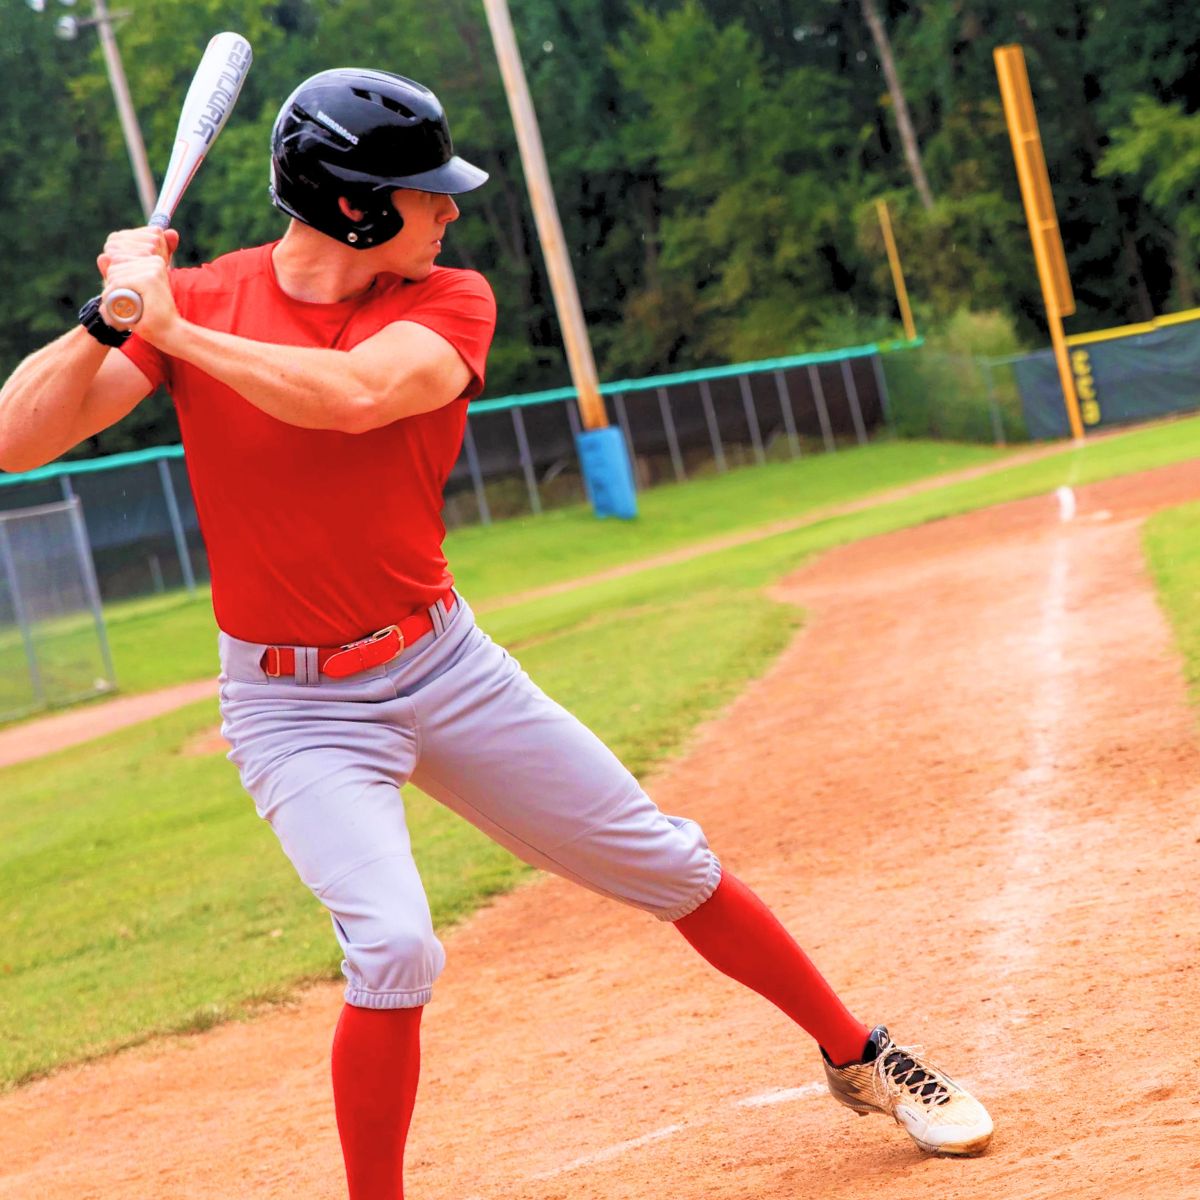 Knicker Baseball Pants Improving Performance and Style in NYC